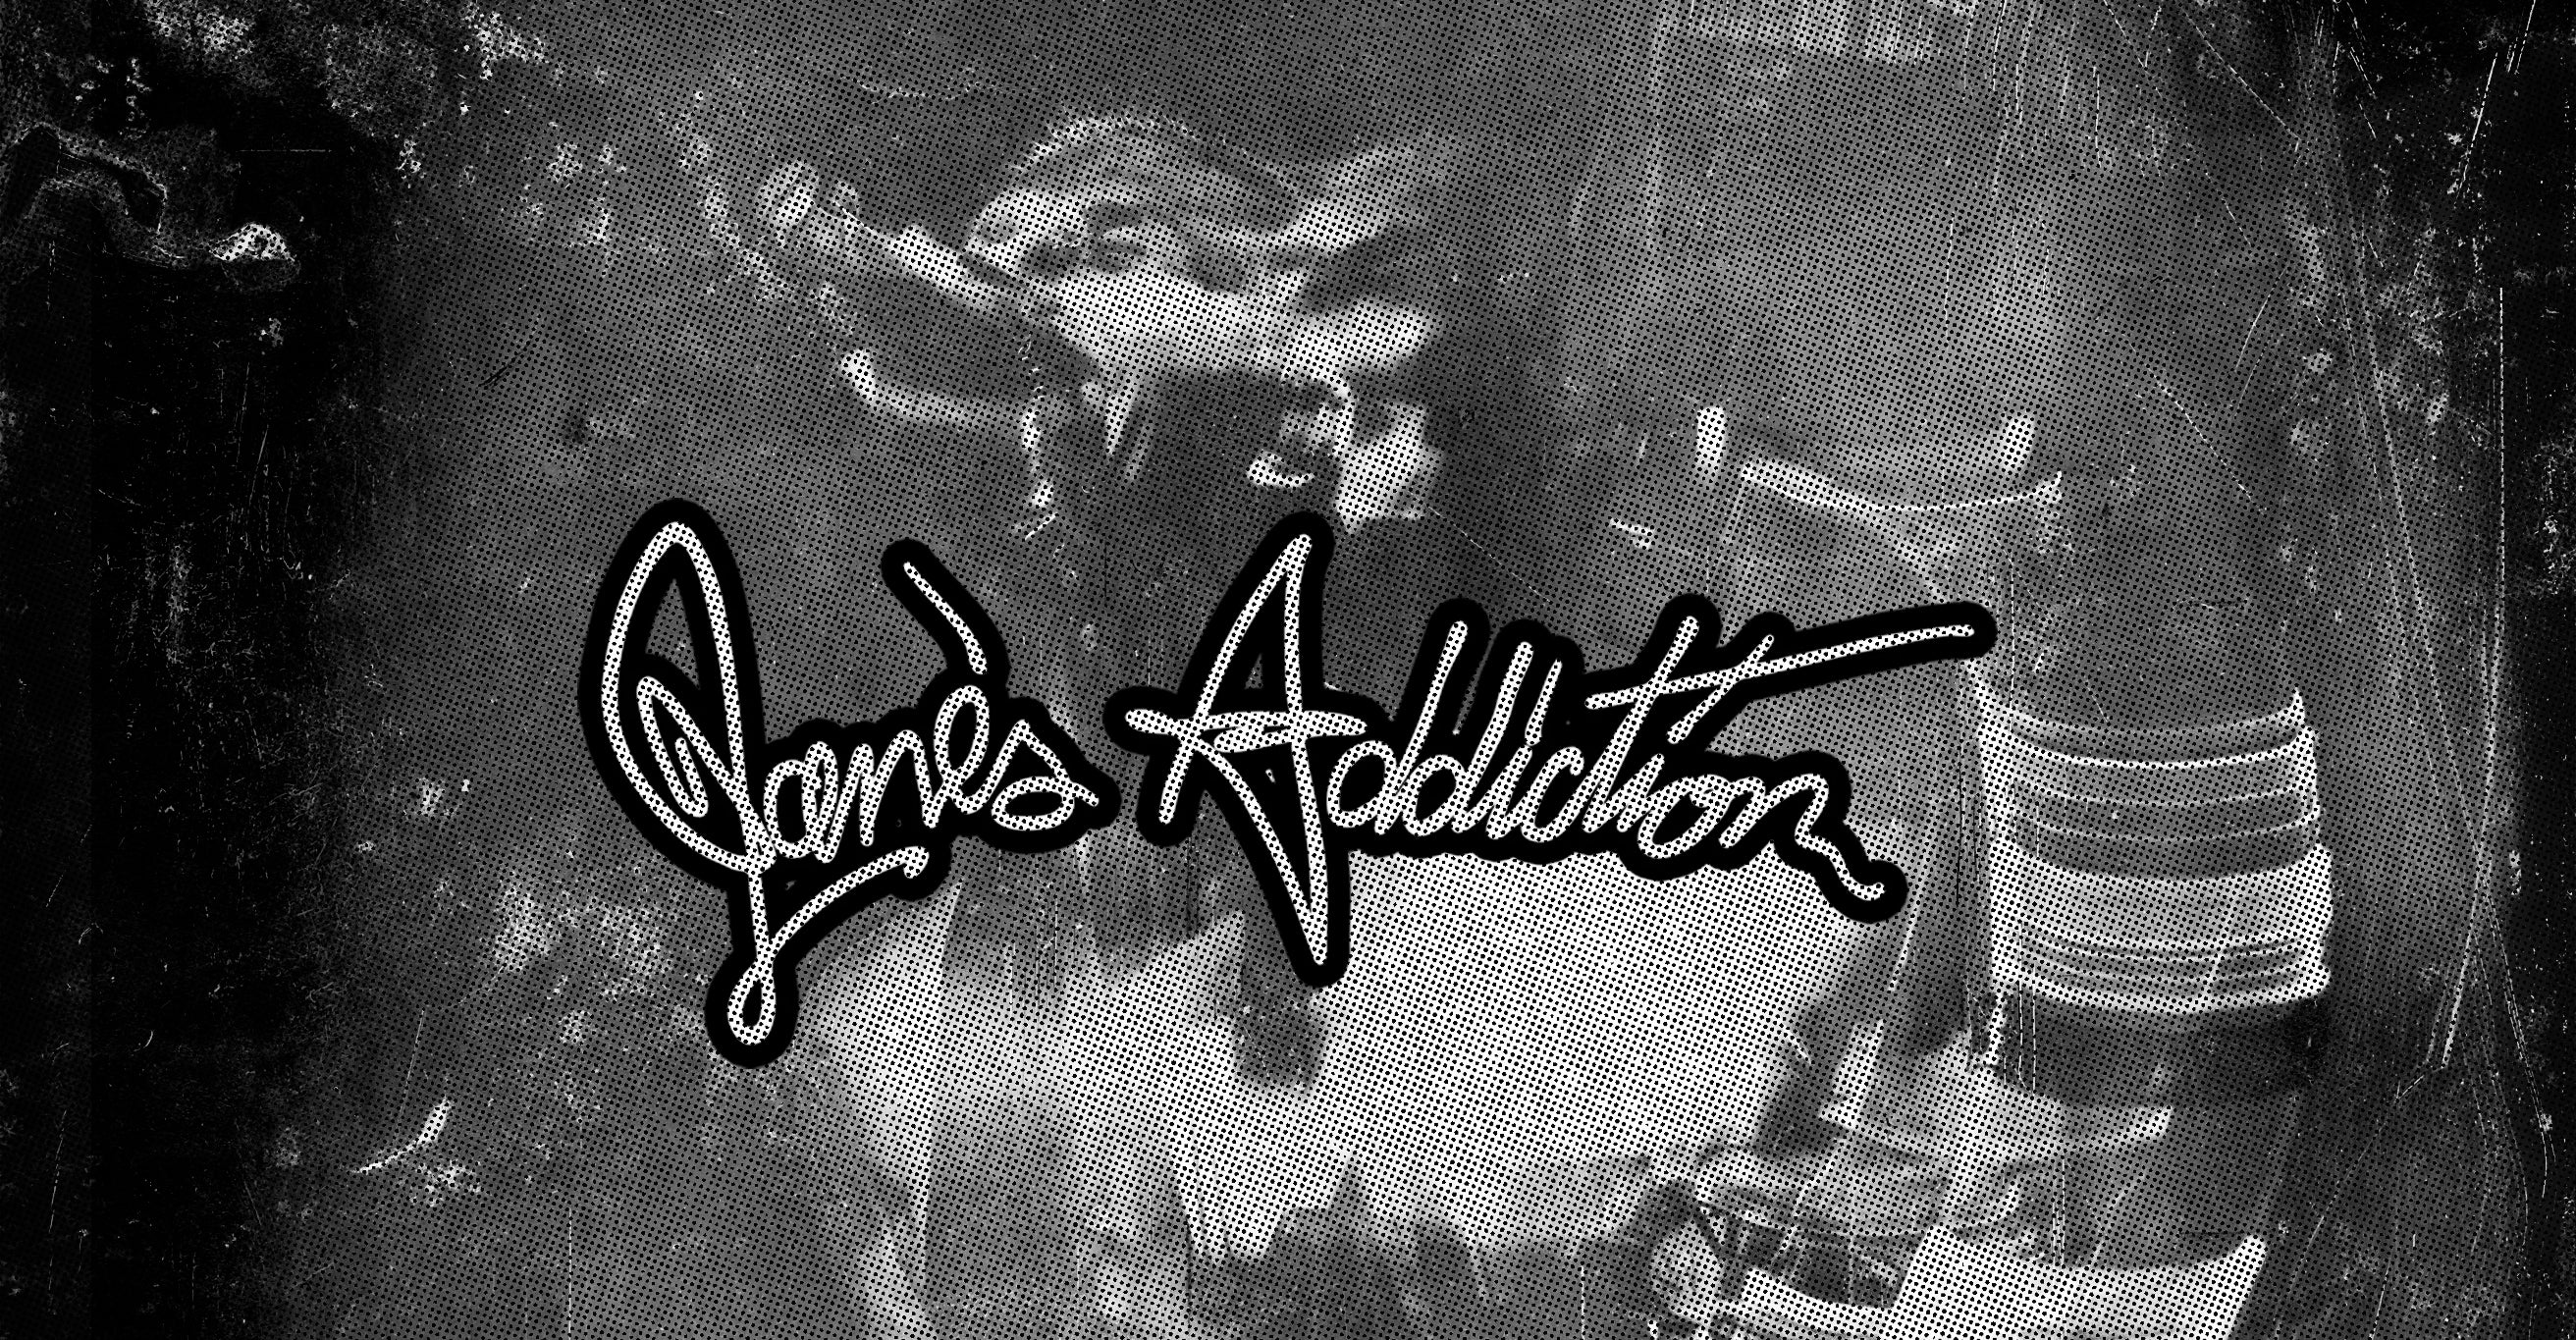 presale code for Jane's Addiction advanced tickets in Hollywood